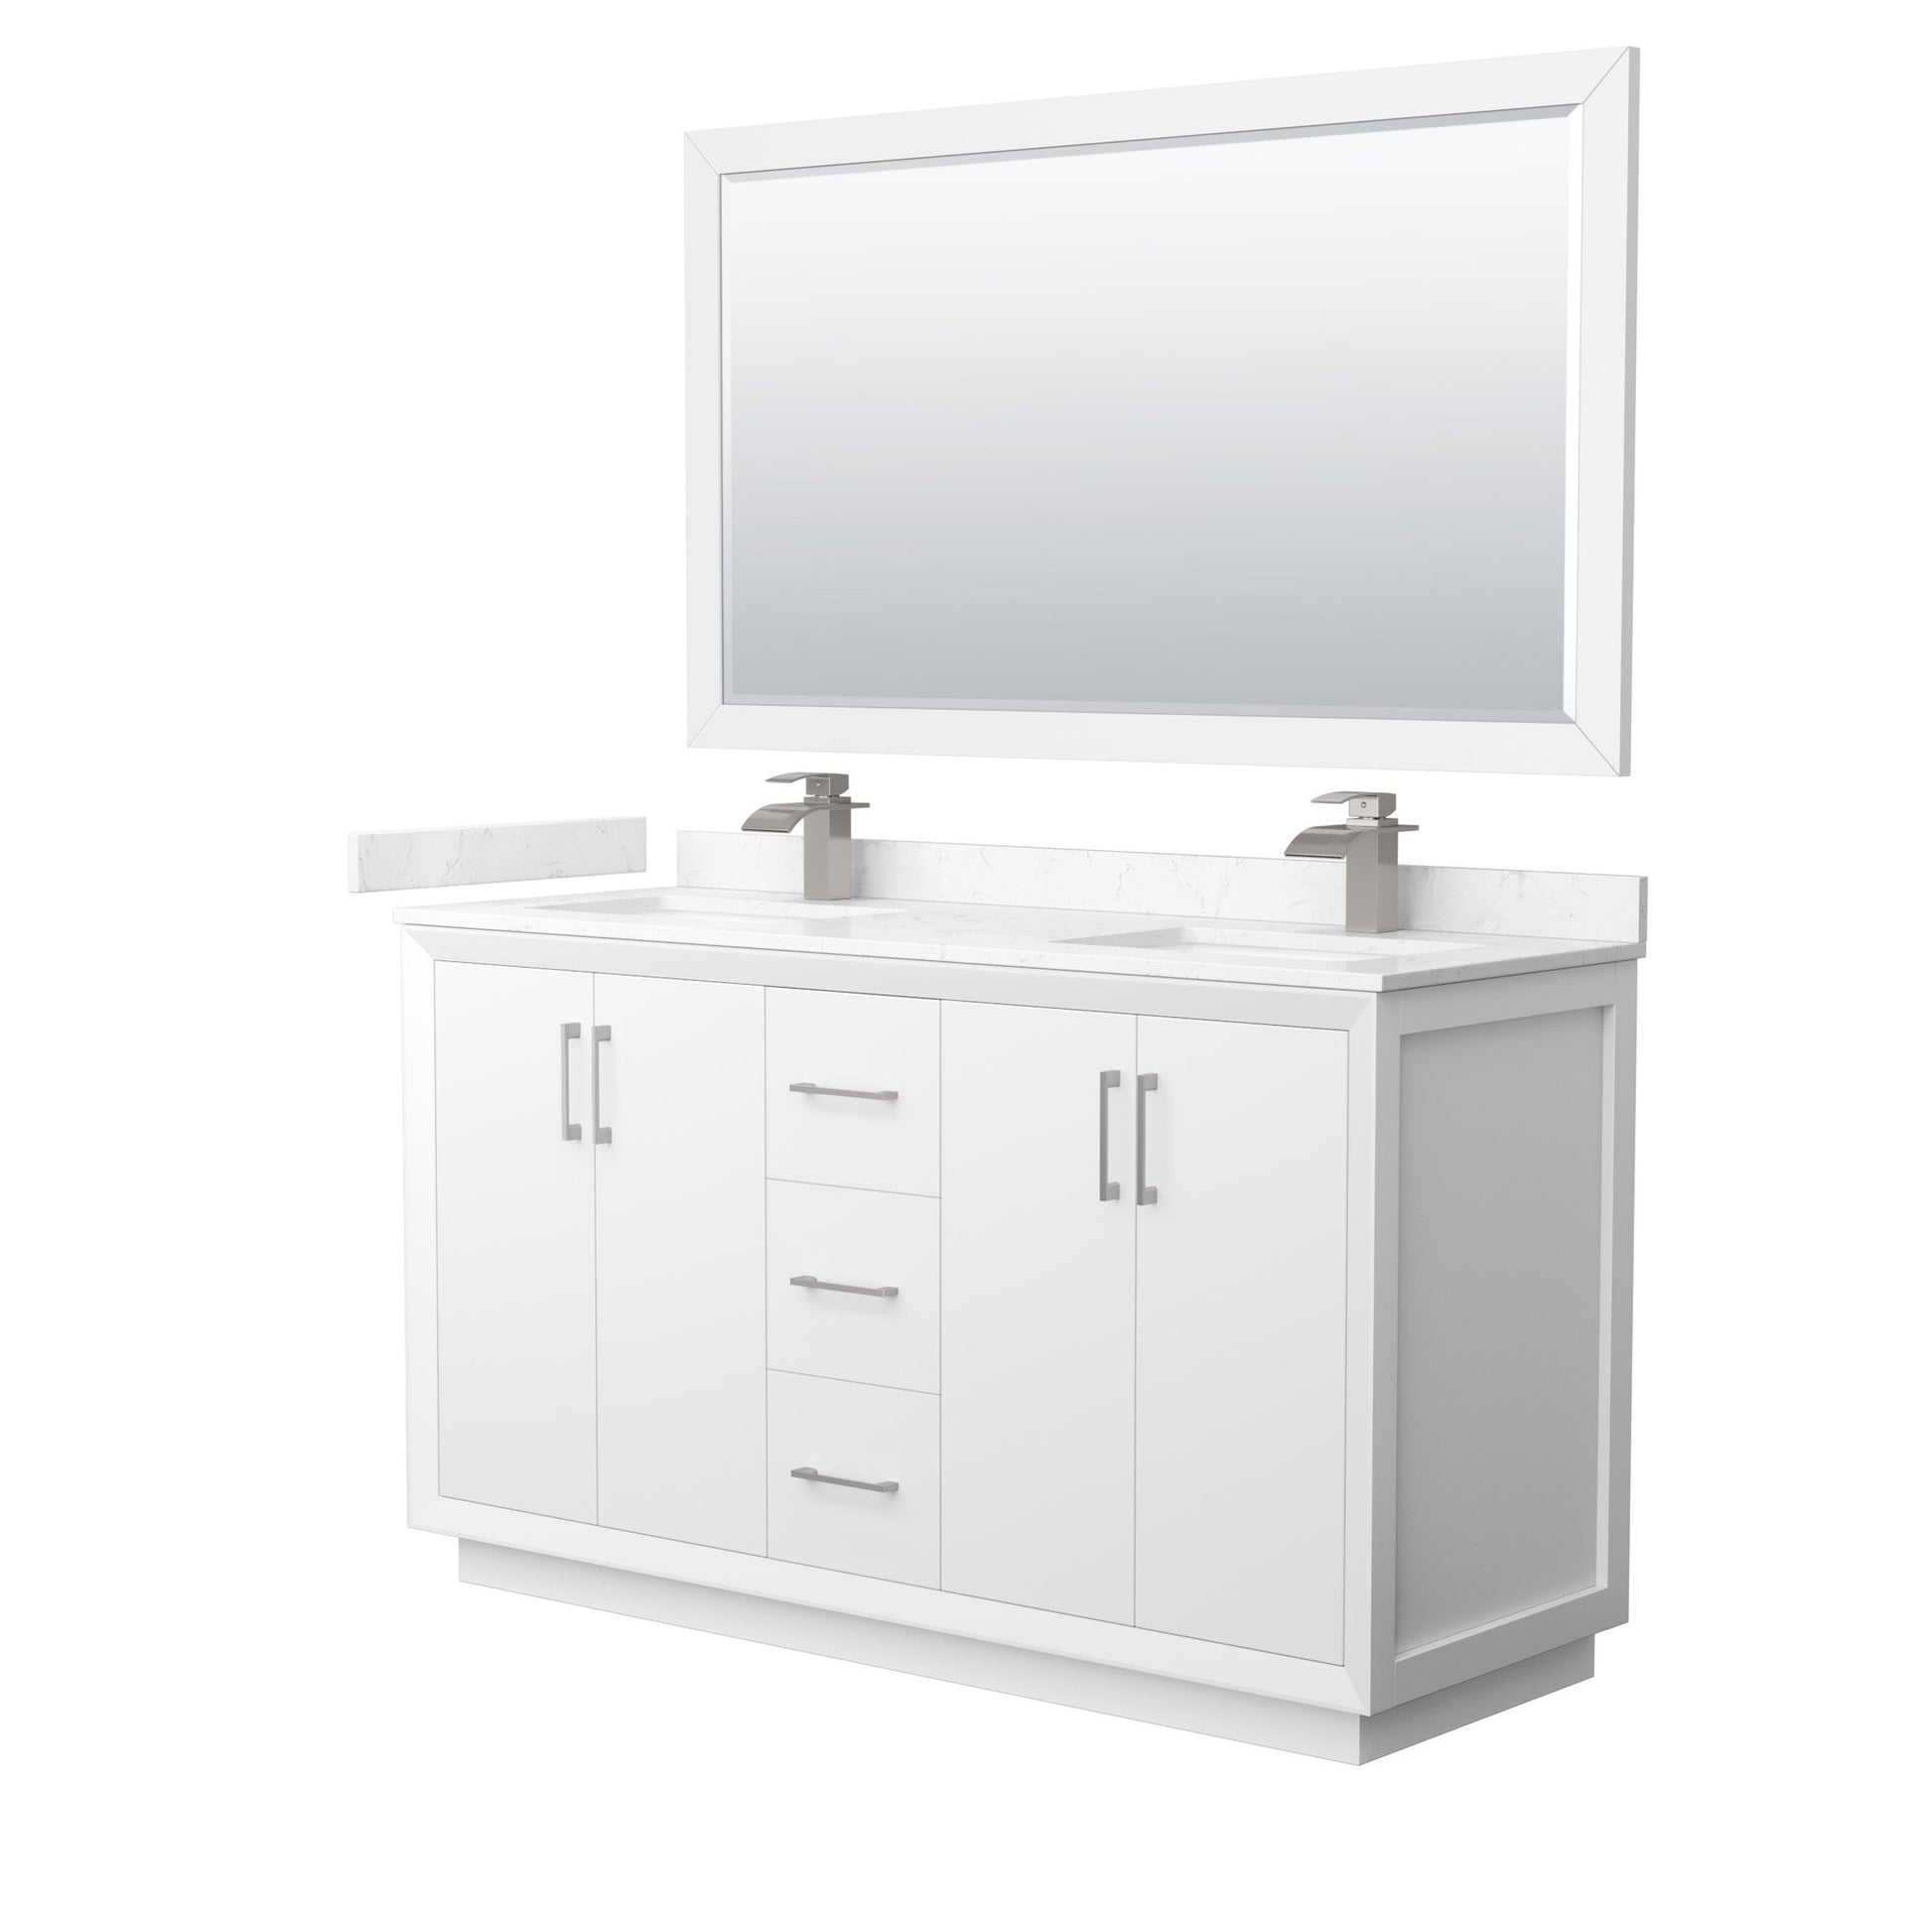 Wyndham Collection Strada 60" Double Bathroom Vanity in White, Carrara Cultured Marble Countertop, Undermount Square Sink, Brushed Nickel Trim, 58" Mirror